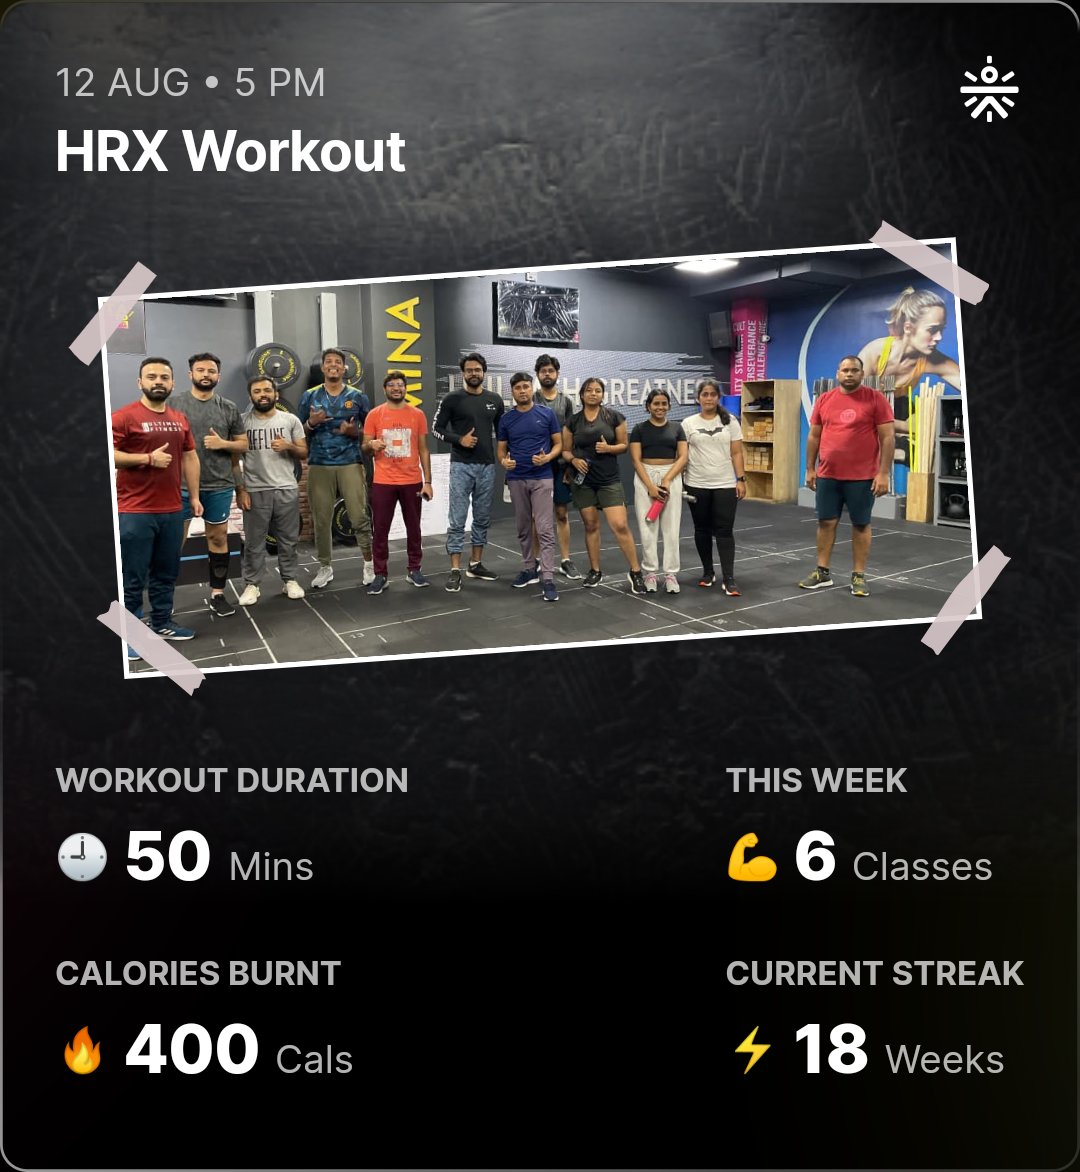 Saturday evenings hit different!! #HRXWorkout #Cultfit #WeAreCult #KeepGoing #BeBetterEveryday @cultfitOfficial